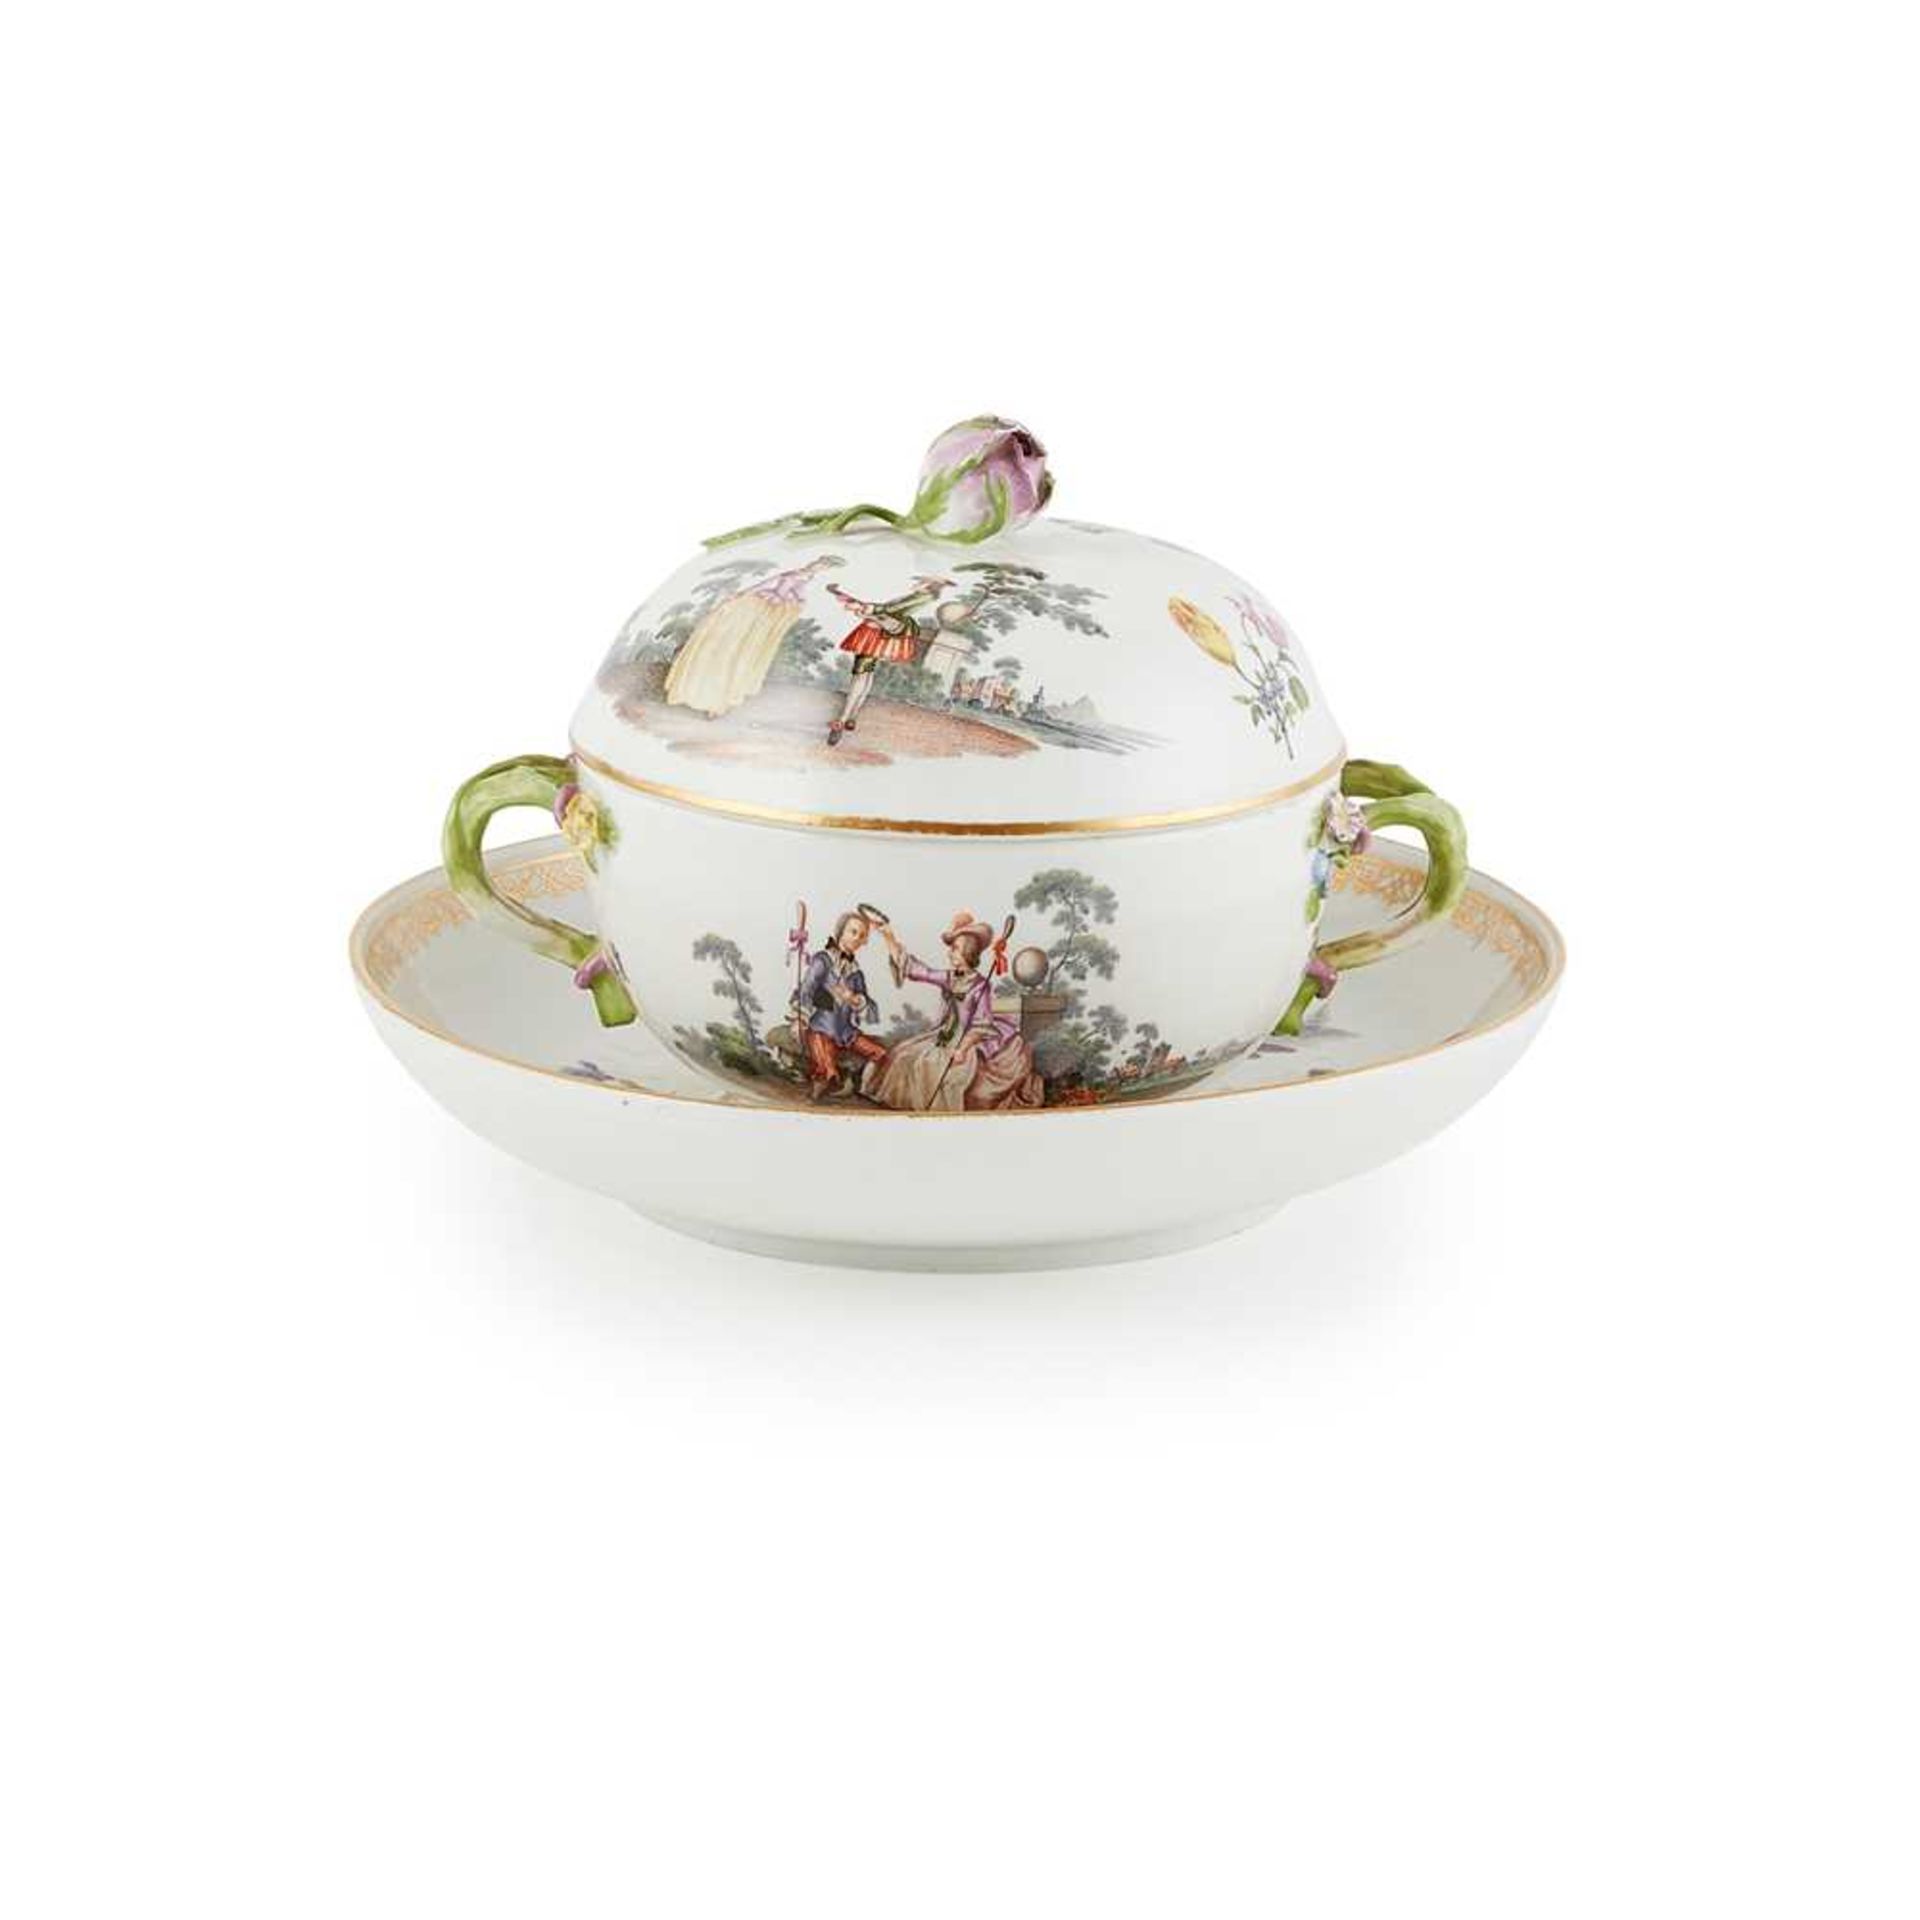 MEISSEN ÉCUELLE AND COVER WITH AN ASSOCIATED STAND 18TH AND 19TH CENTURY